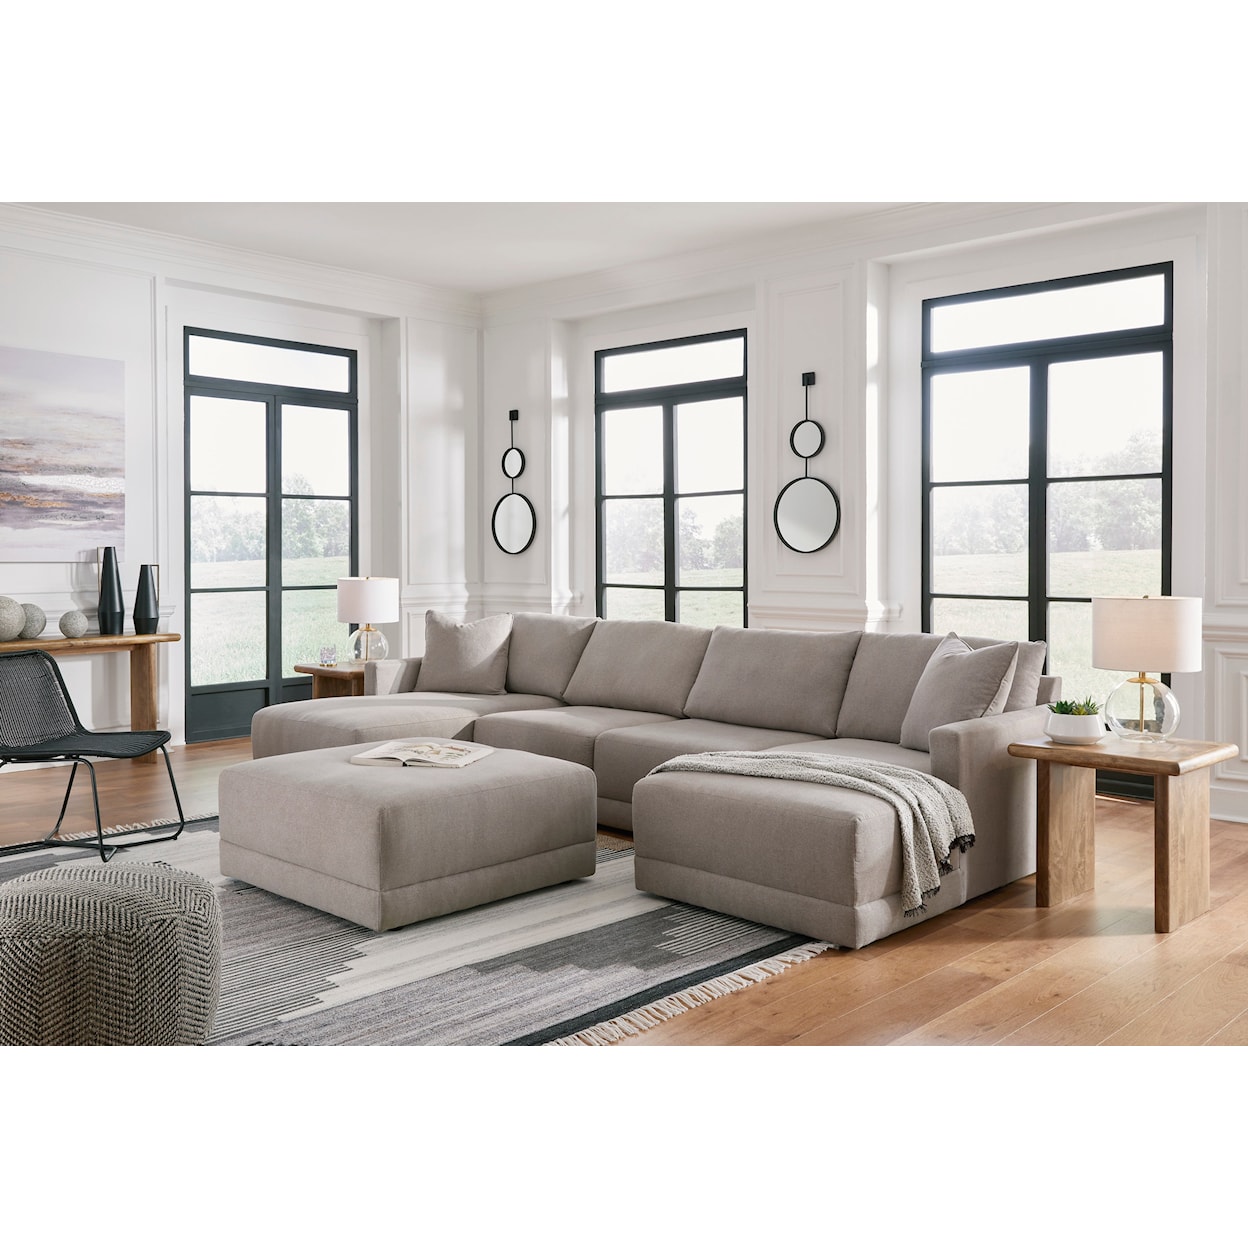 Benchcraft Katany Double Chaise Sectional